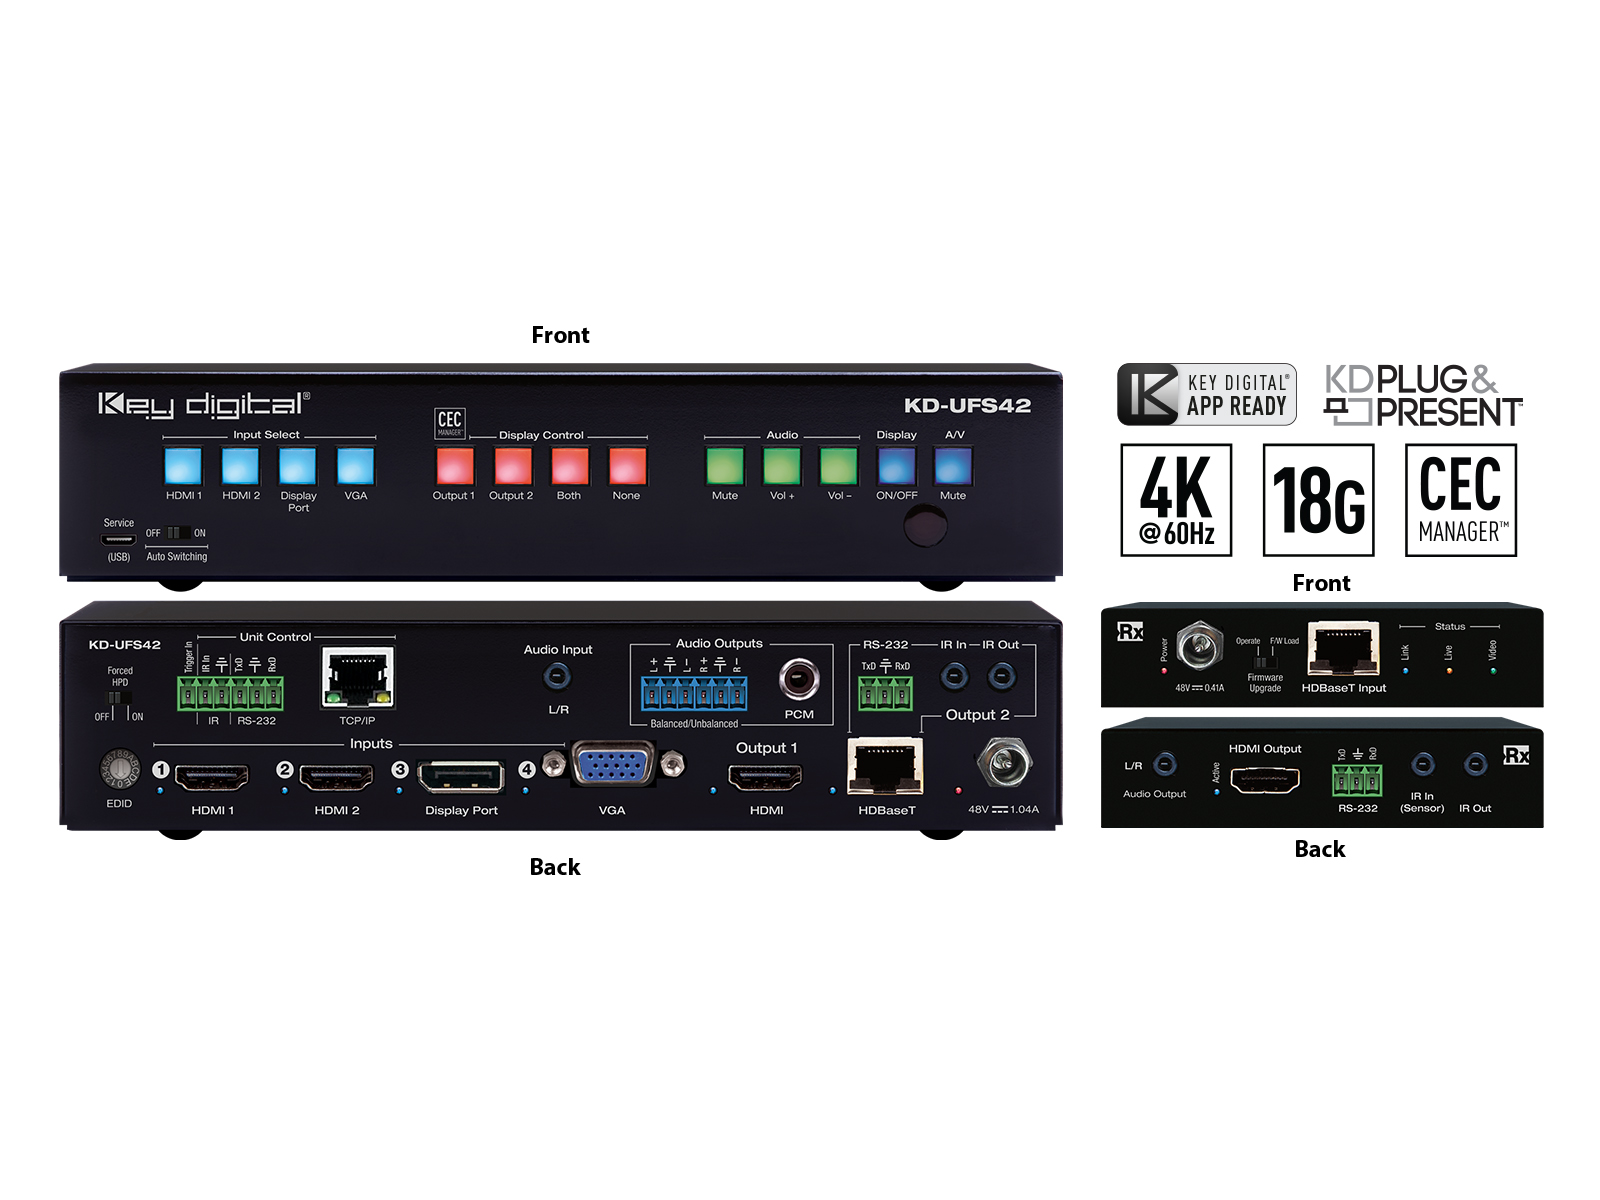 KD-UFS42 4x4 4K 18G Universal Format HDMI/DP/VGA Switcher with Mirrored Outputs/CEC/Auto Switching/Receiver Included by Key Digital